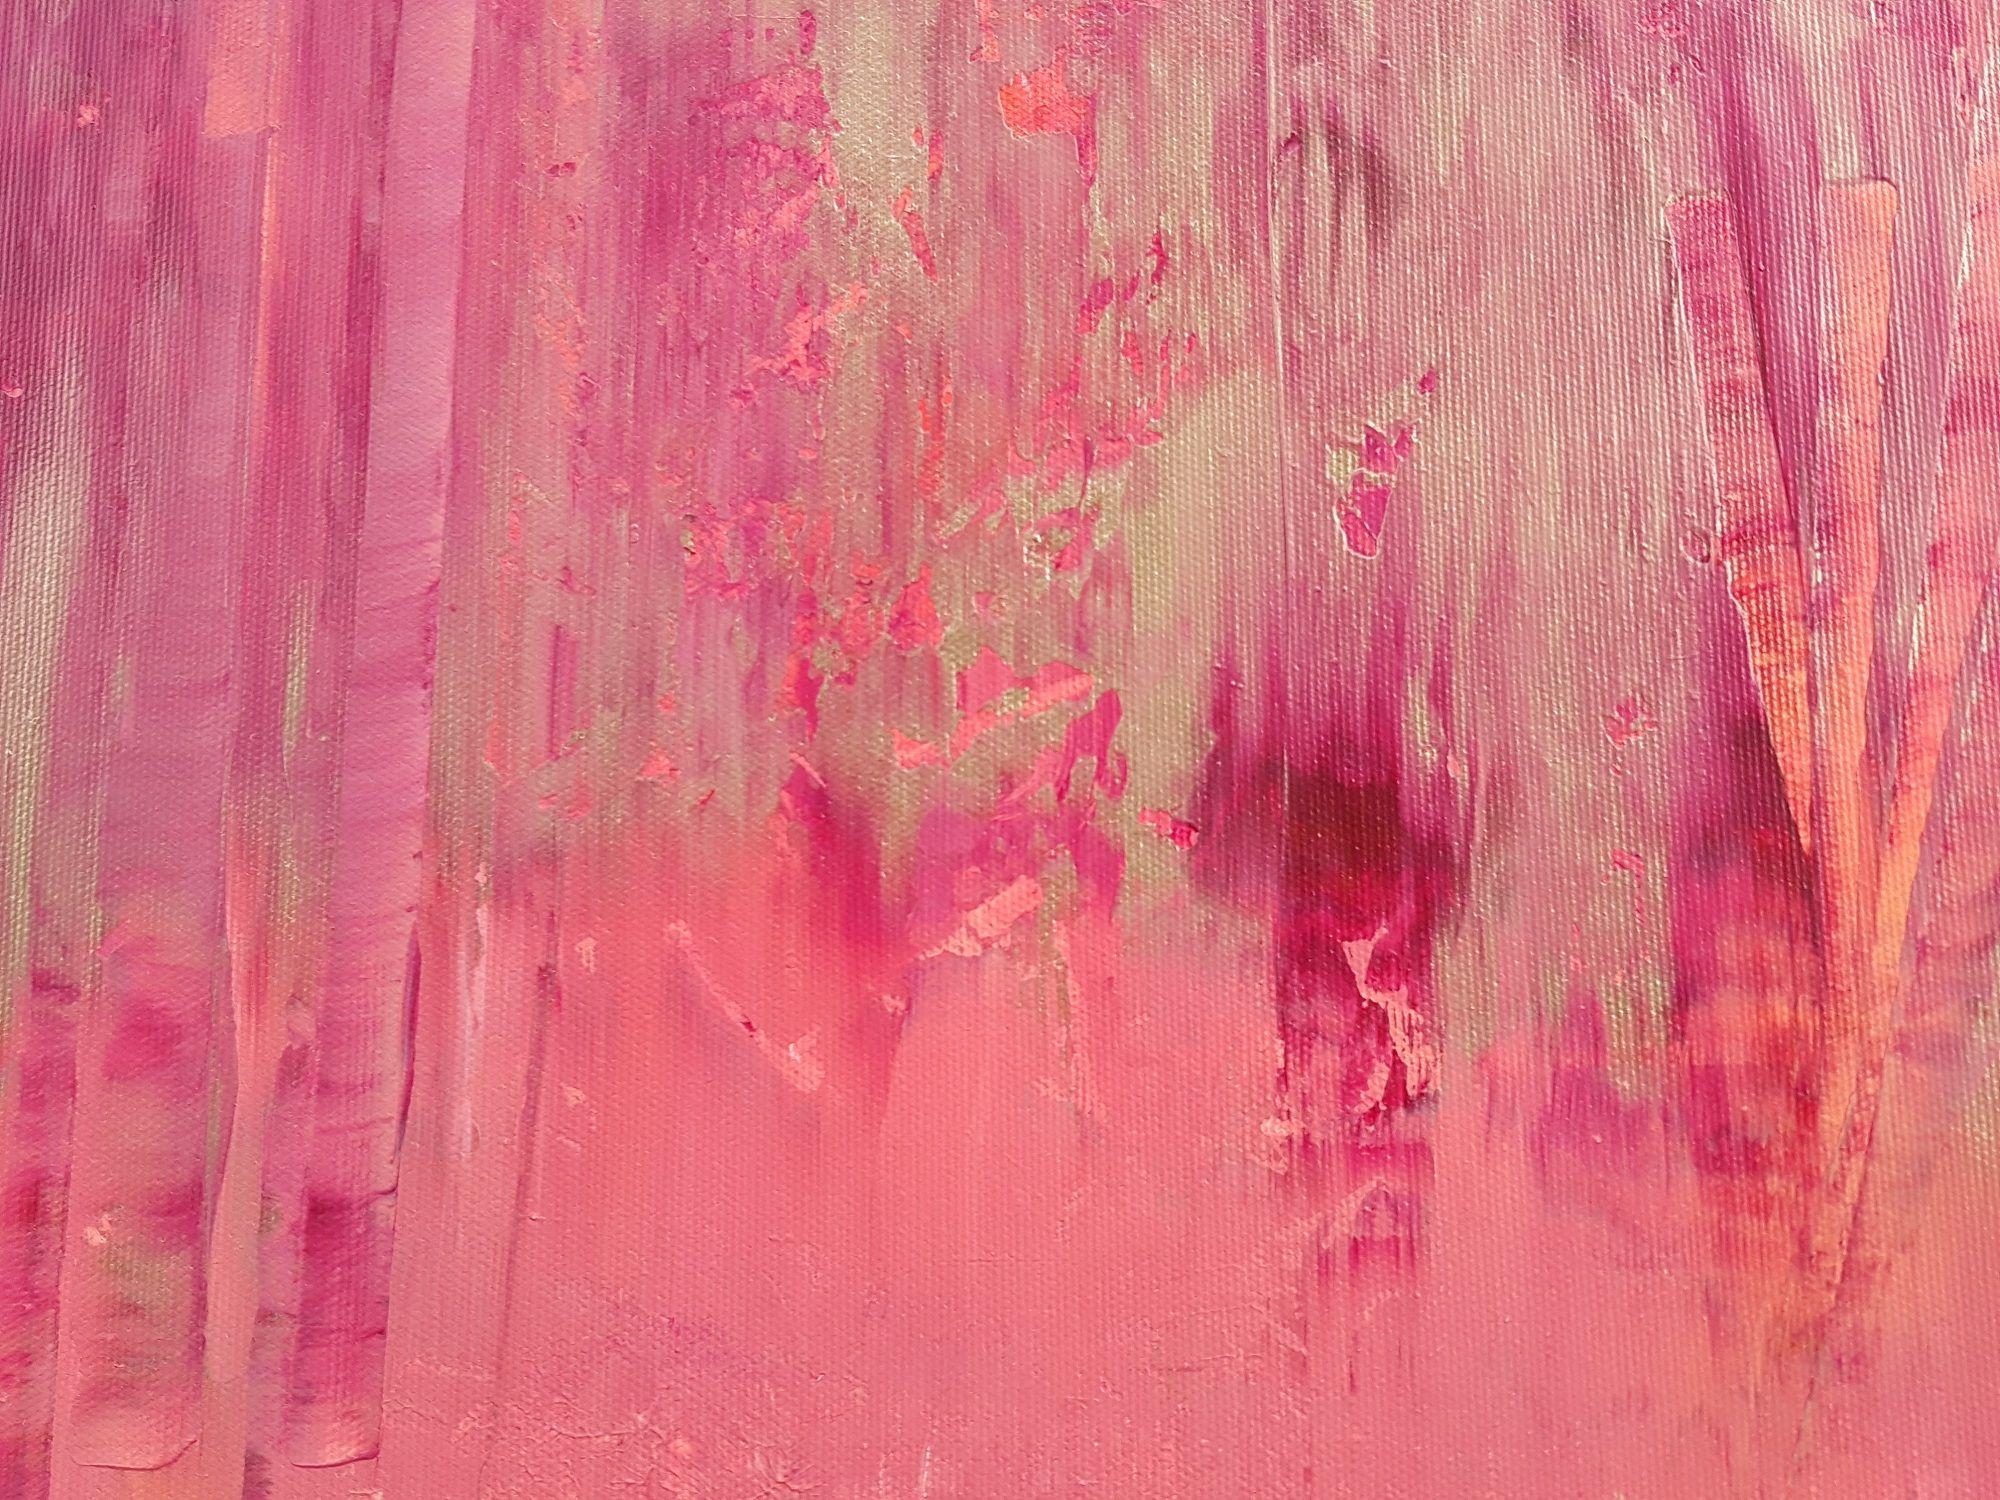 Frozen roses, Painting, Acrylic on Canvas - Pink Abstract Painting by Ivana Olbricht